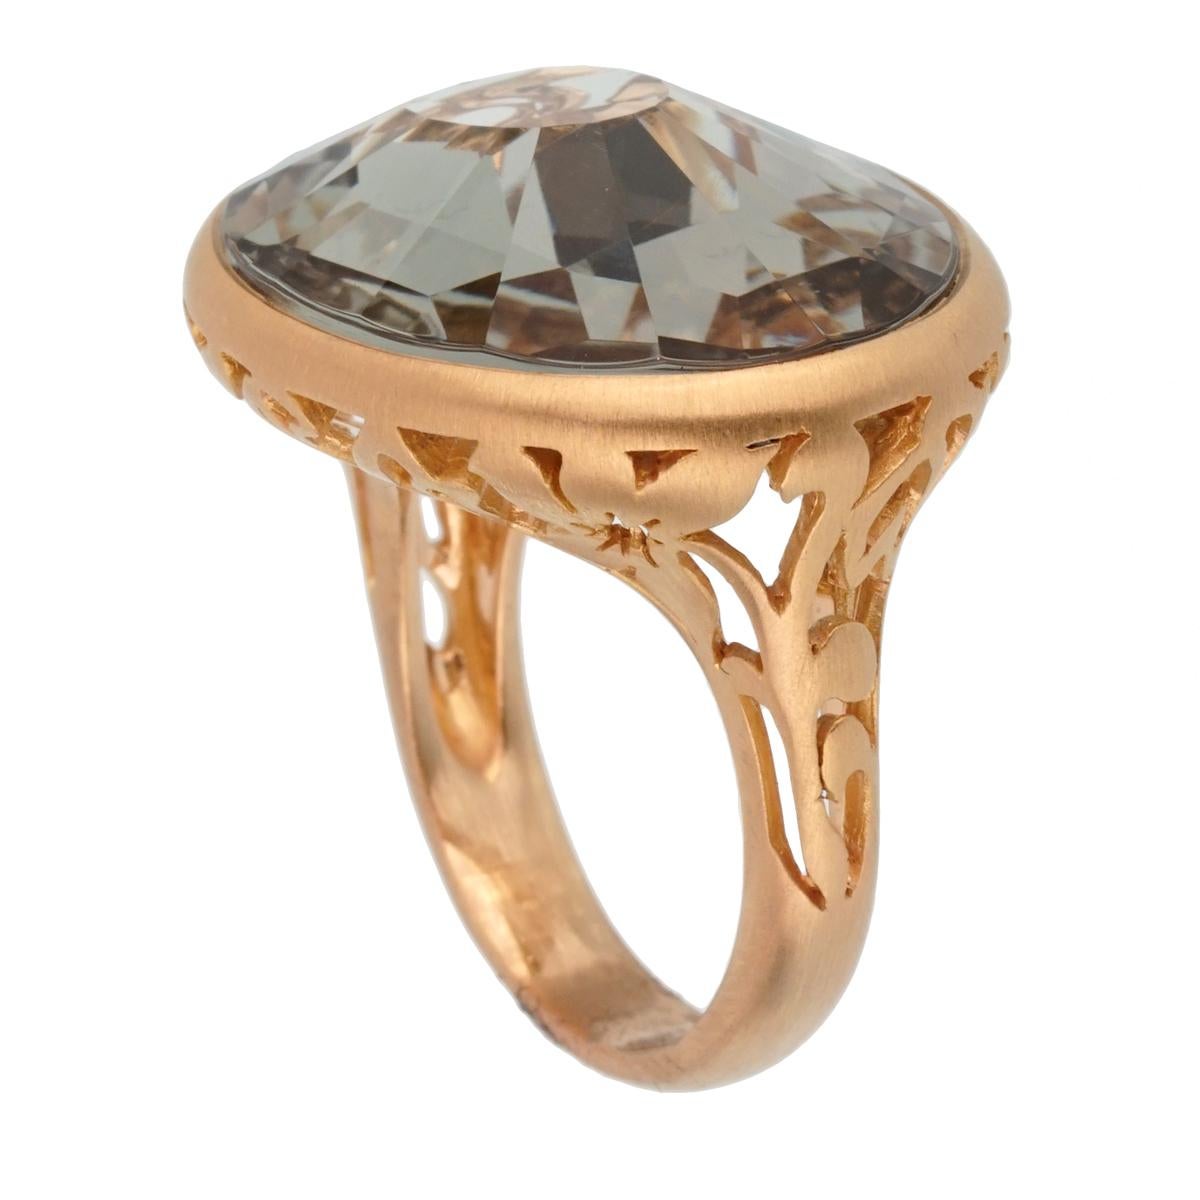 A chic brand new Pomellato cocktail ring showcasing a 10.19ct Green Prasiolite set in 18k rose gold. The ring measures a size 6 1/2 and can be resized

Pomellato Retail: $5500
Sku: 2439